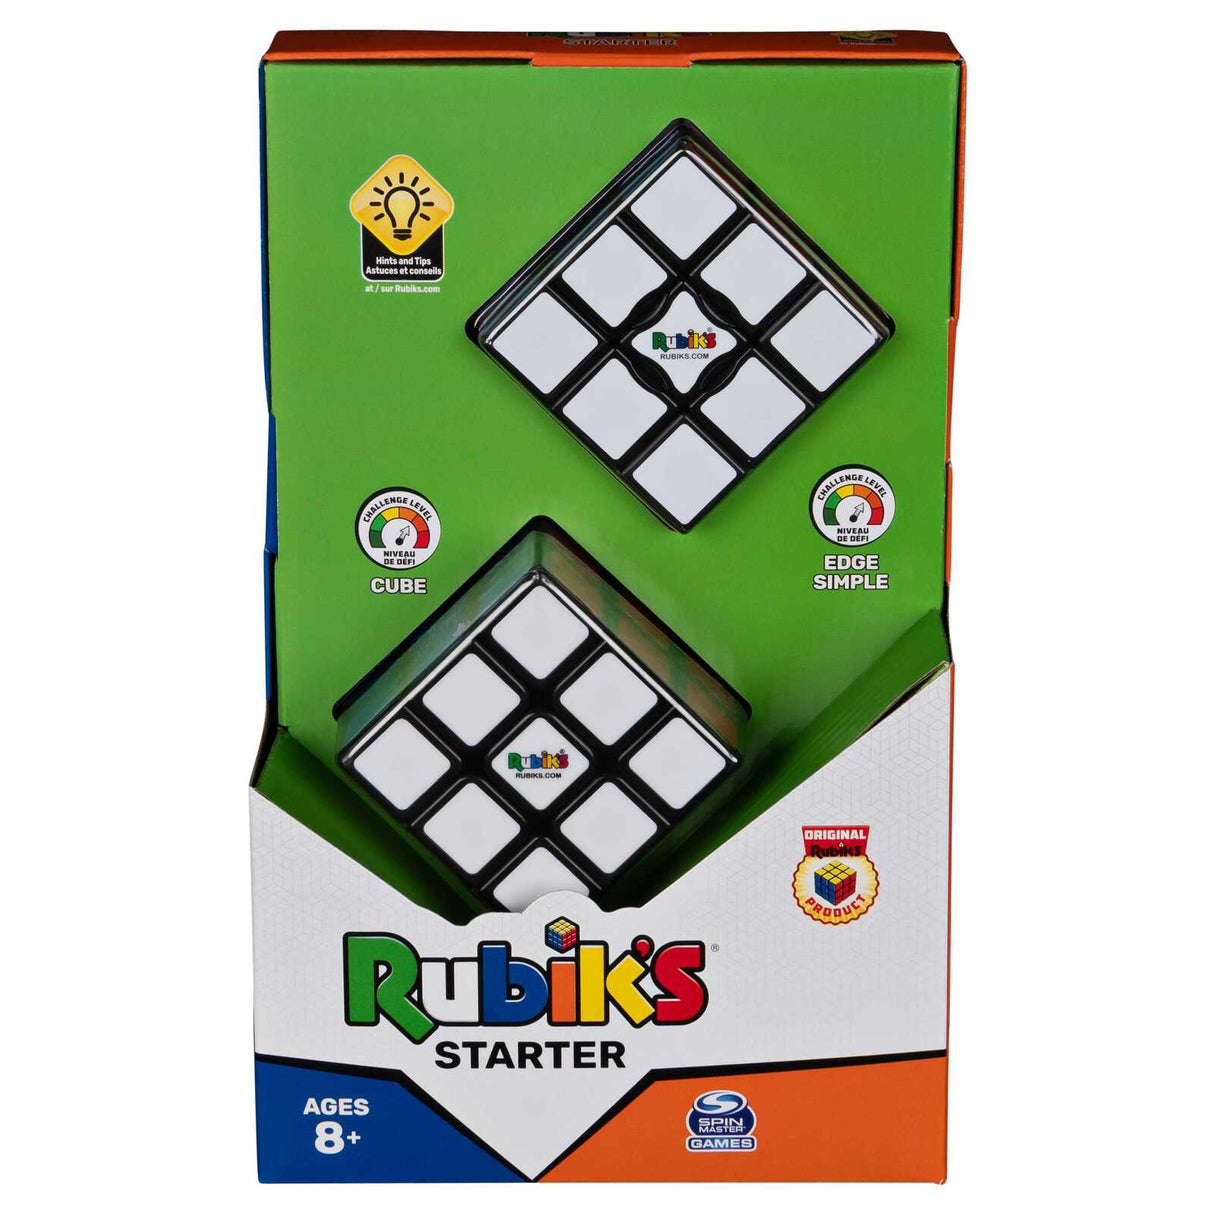 Colorful Rubik's Cube Starter Pack - Classic puzzle toy with 3x3 and 2x2 cubes, challenging brain teasers for ages 8+.